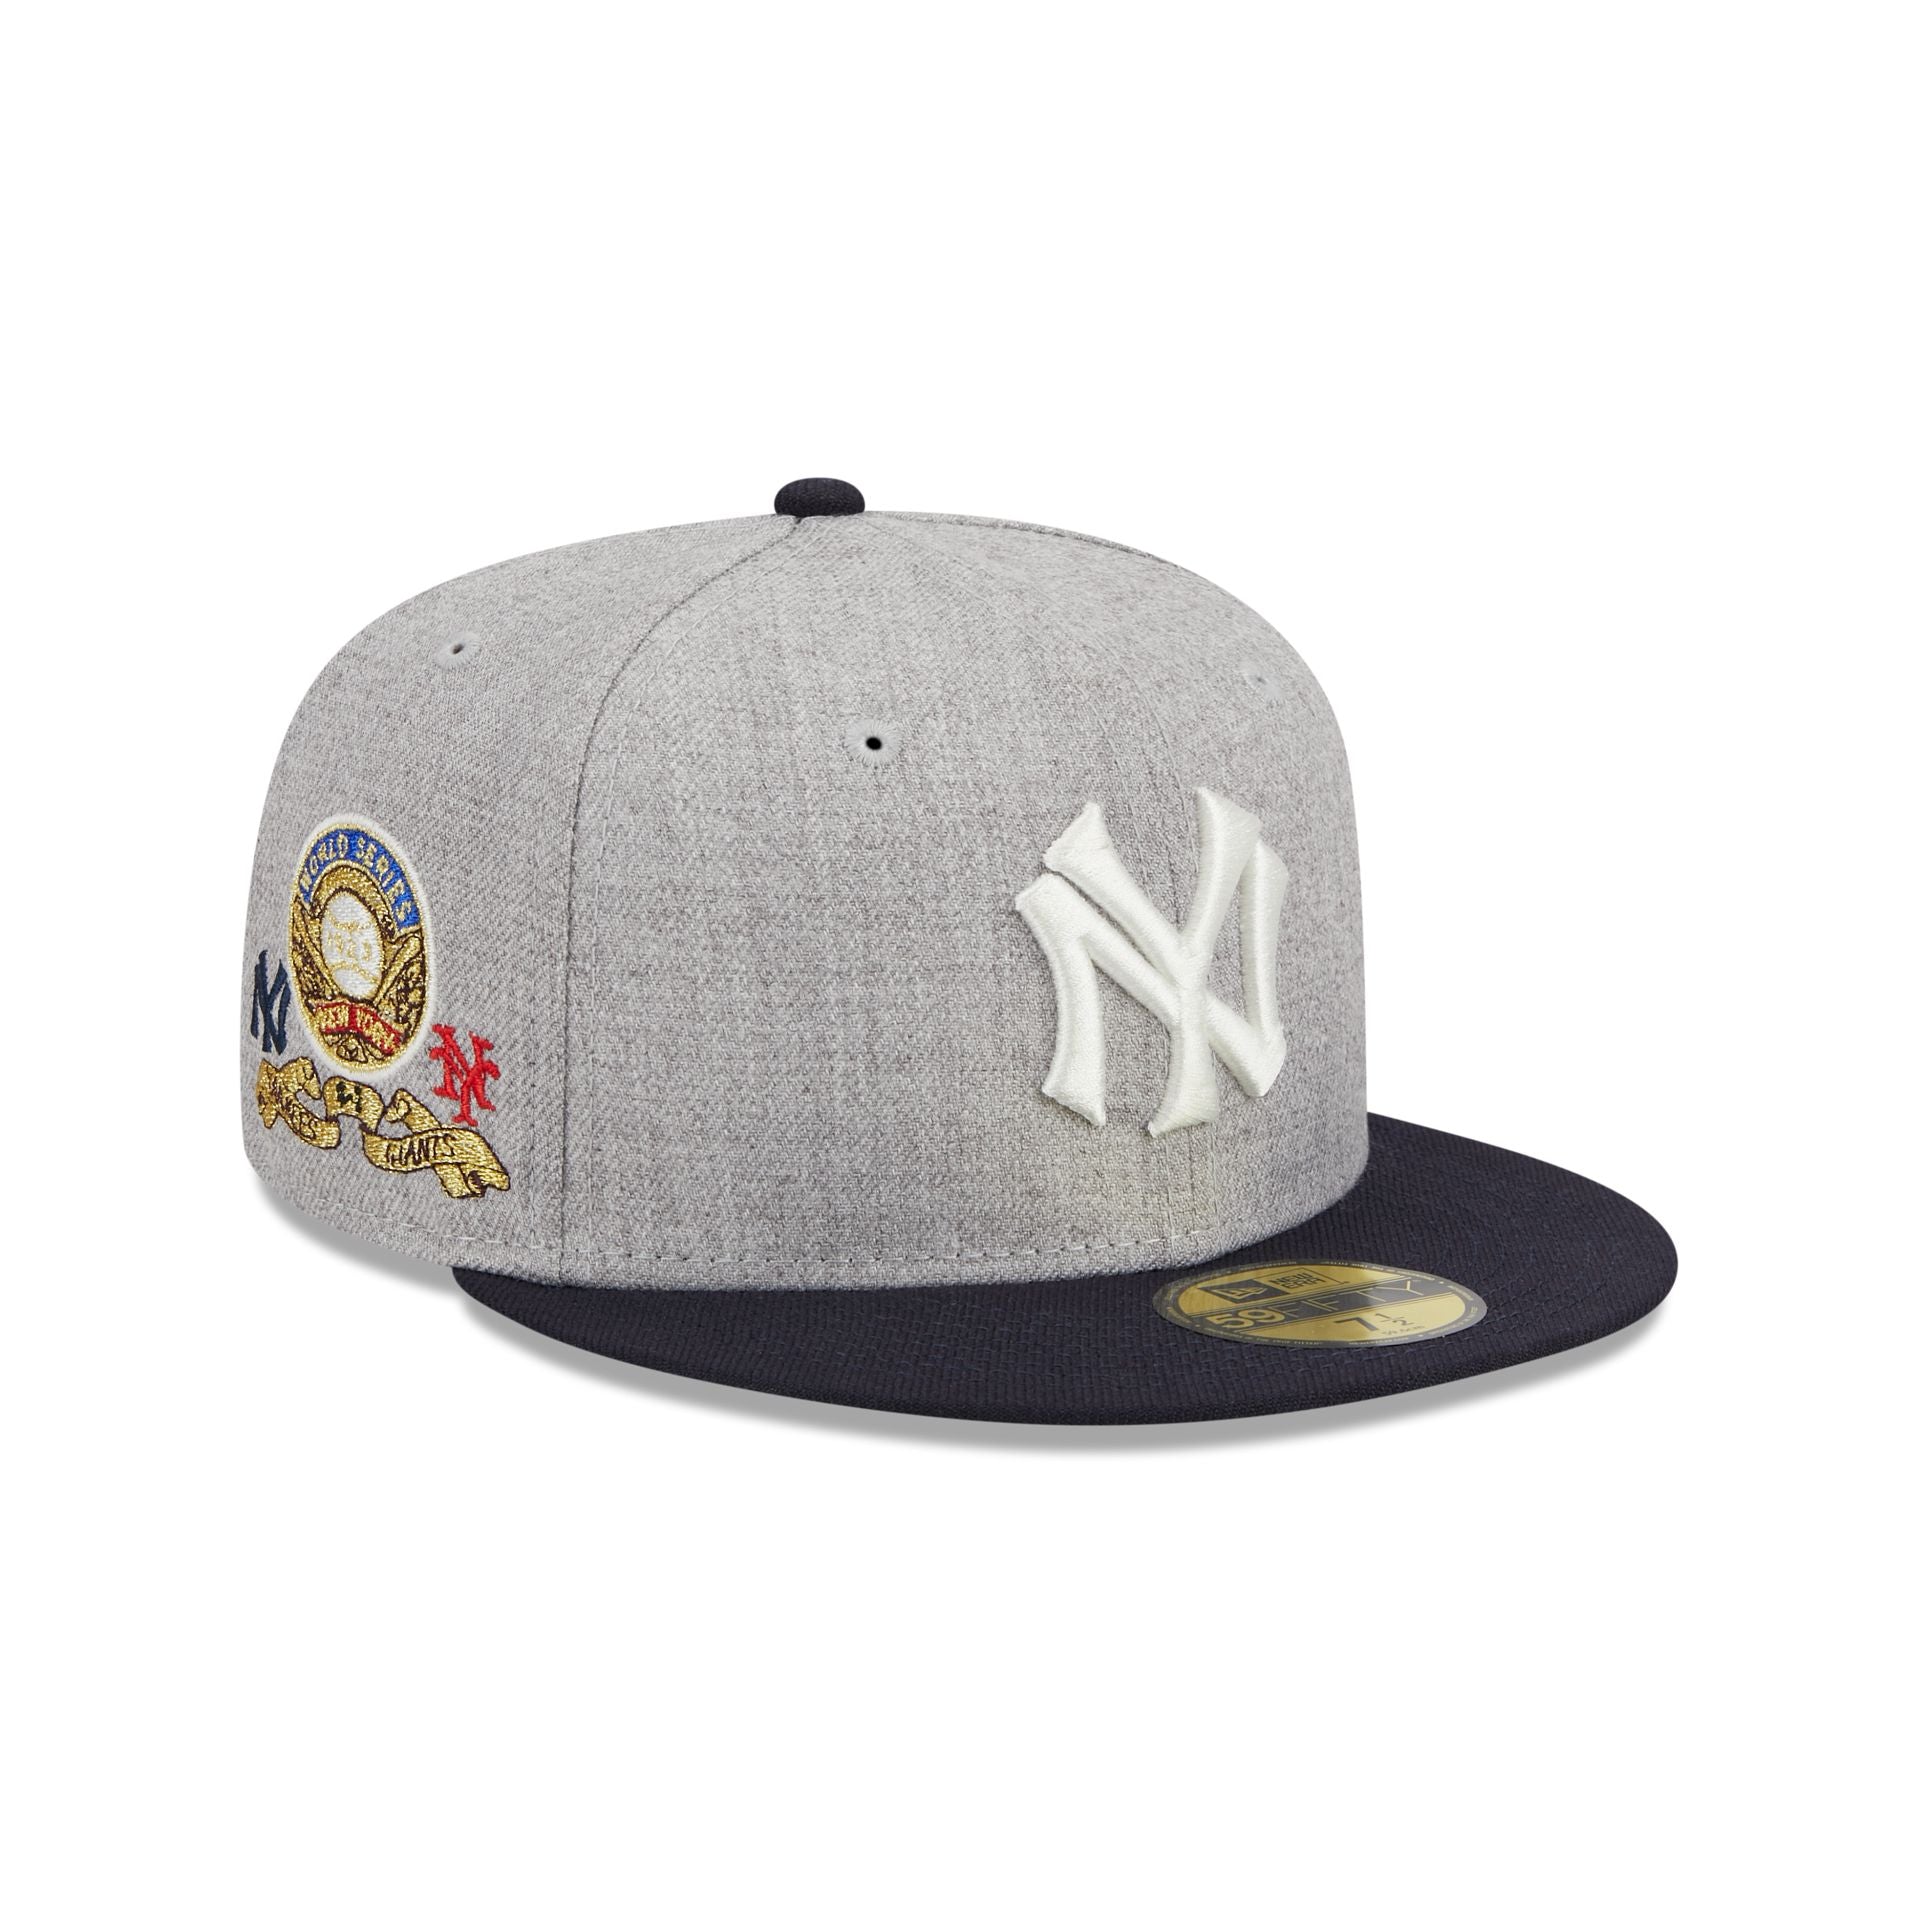 Men's New Era Gray/Blue York Yankees Dolphin 59FIFTY Fitted Hat